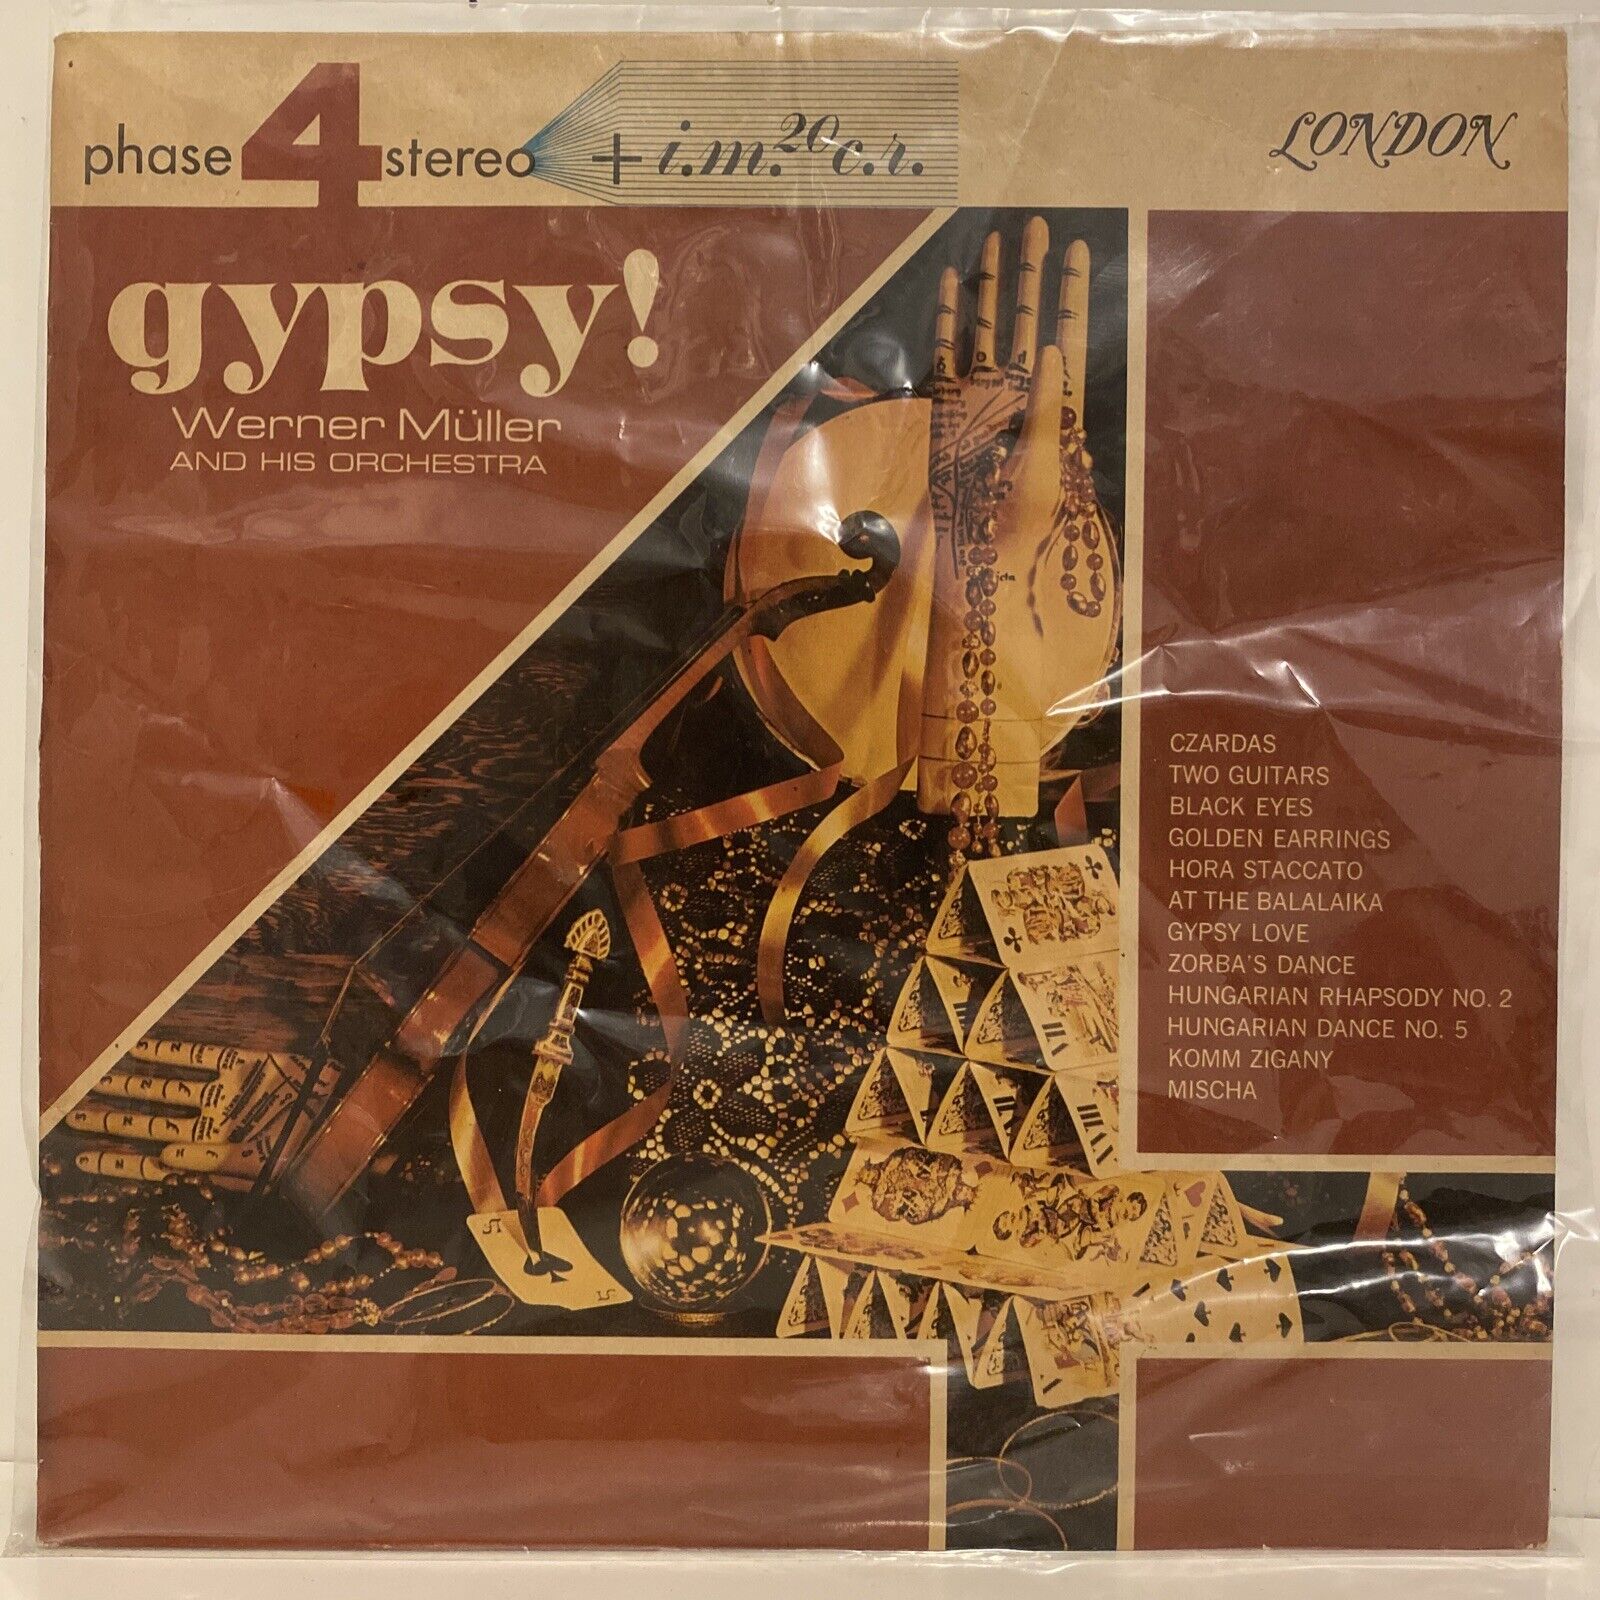 Vinyl LP: Werner Muller, “Gypsy!”, Phase 4 Stereo London Records SP 44086